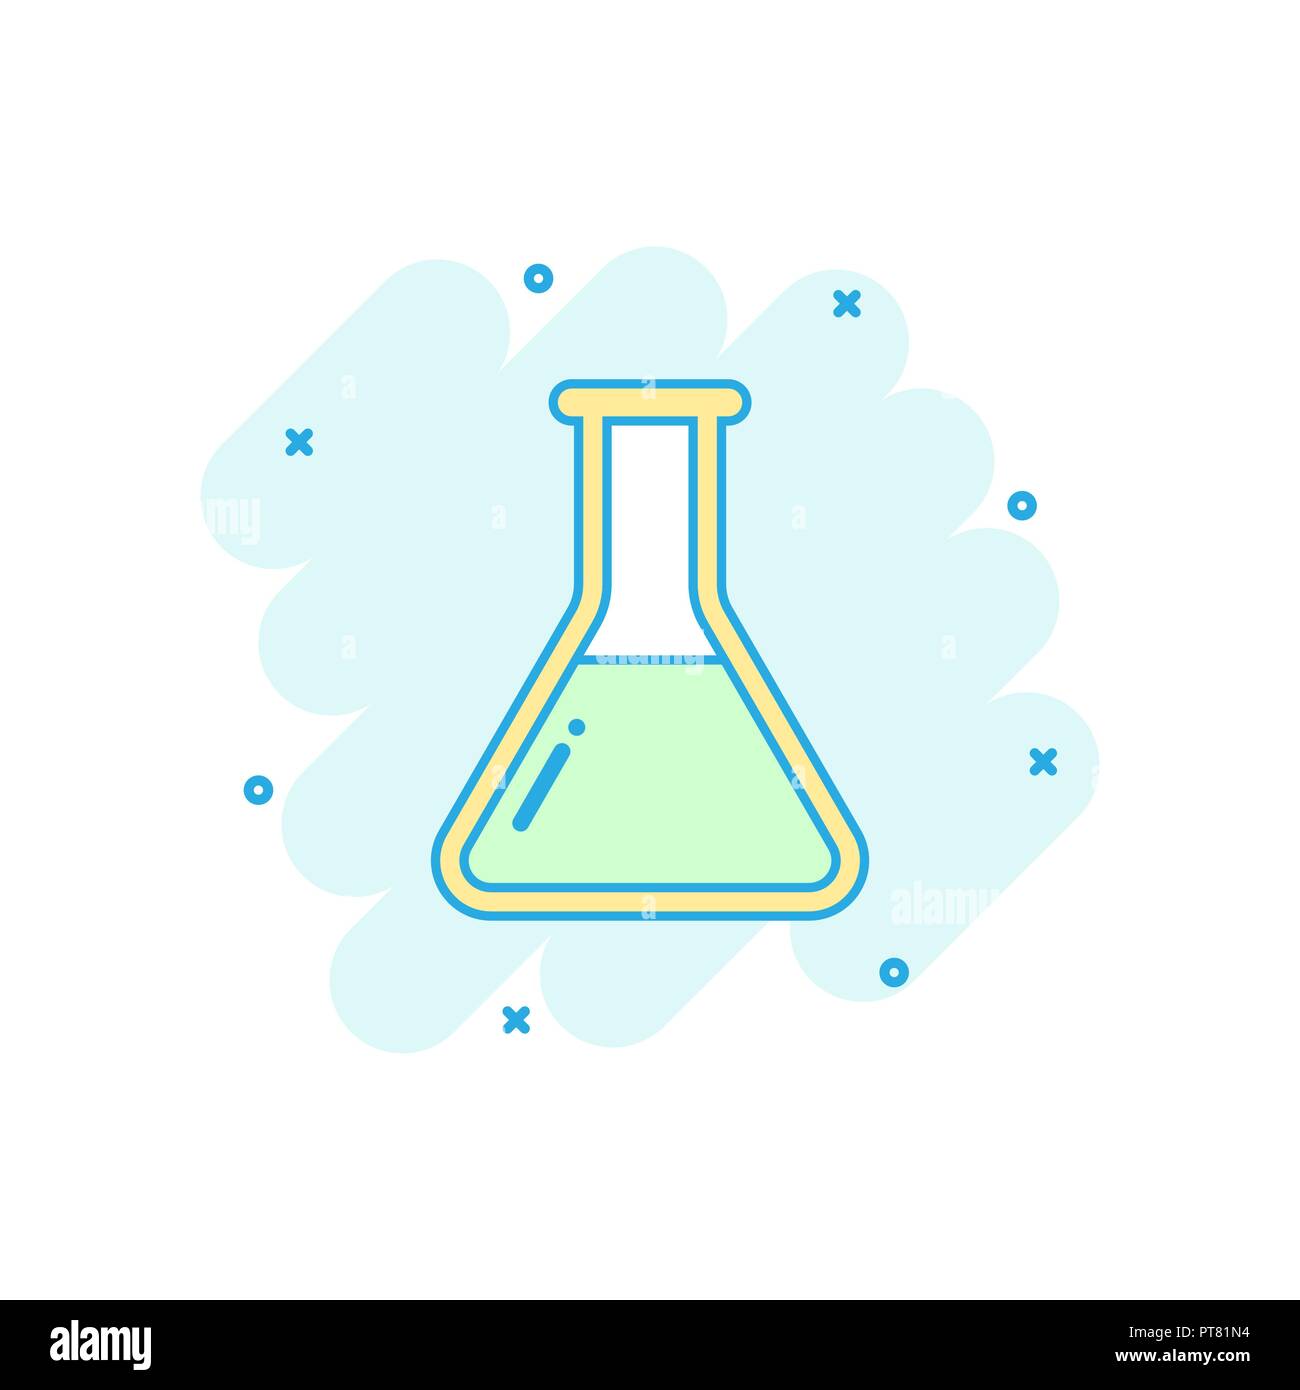 Cartoon colored chemical test tube icon in comic style. Laboratory glassware or beaker equipment illustration pictogram. Experiment flasks sign splash Stock Vector